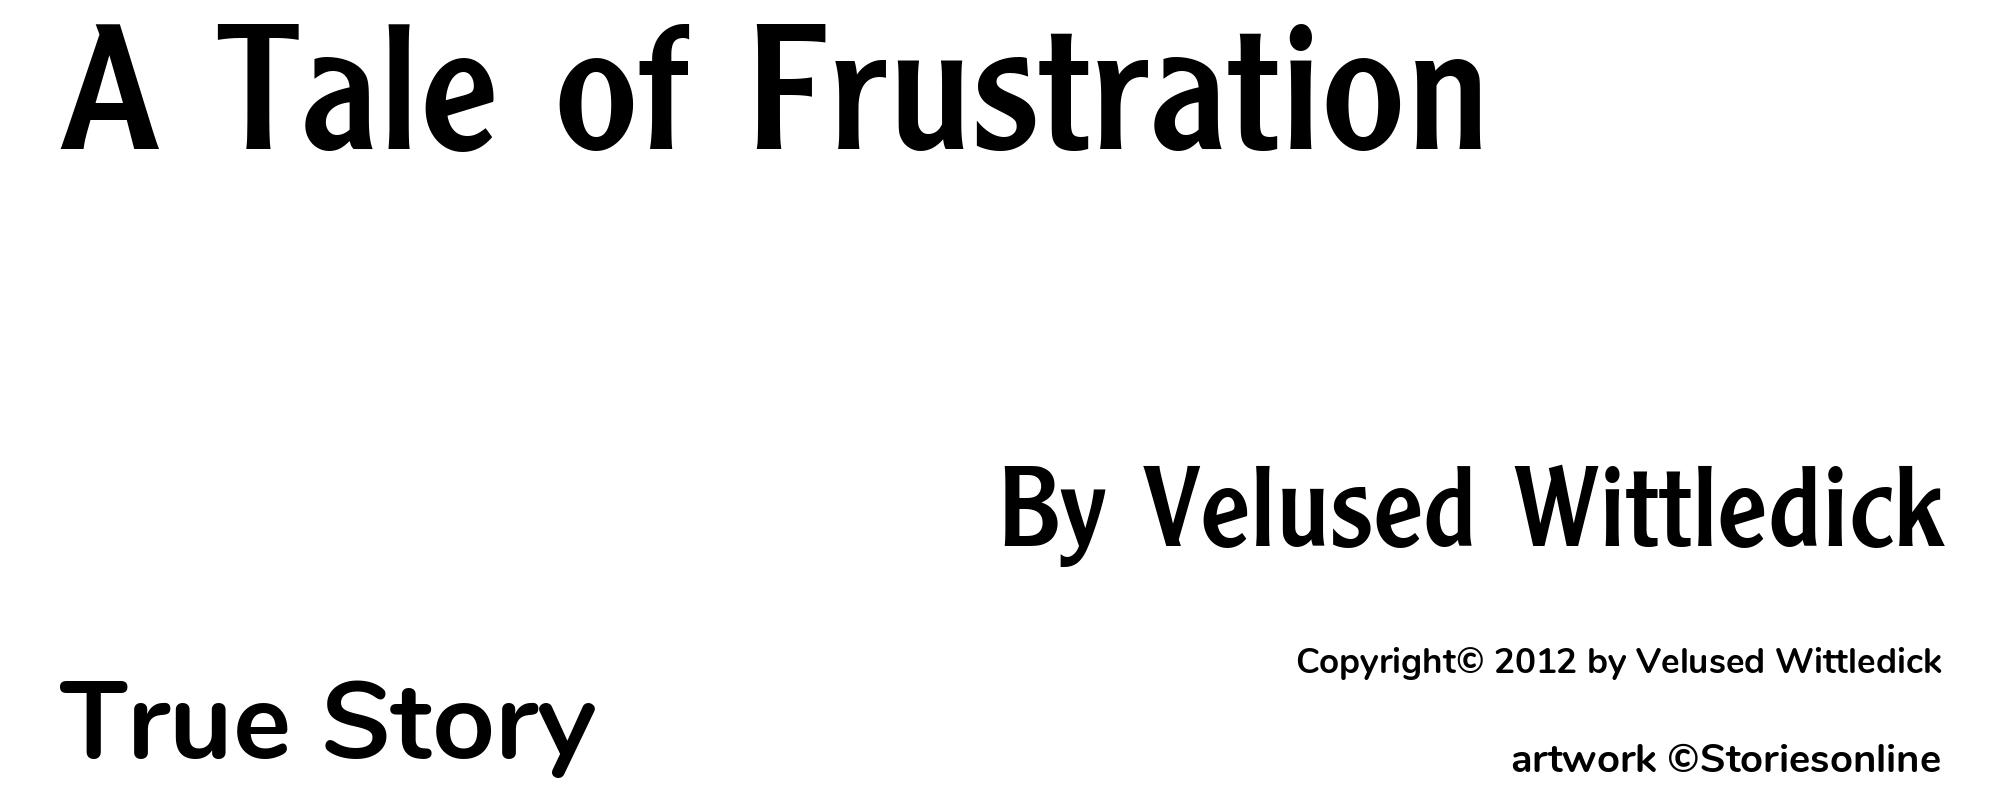 A Tale of Frustration - Cover